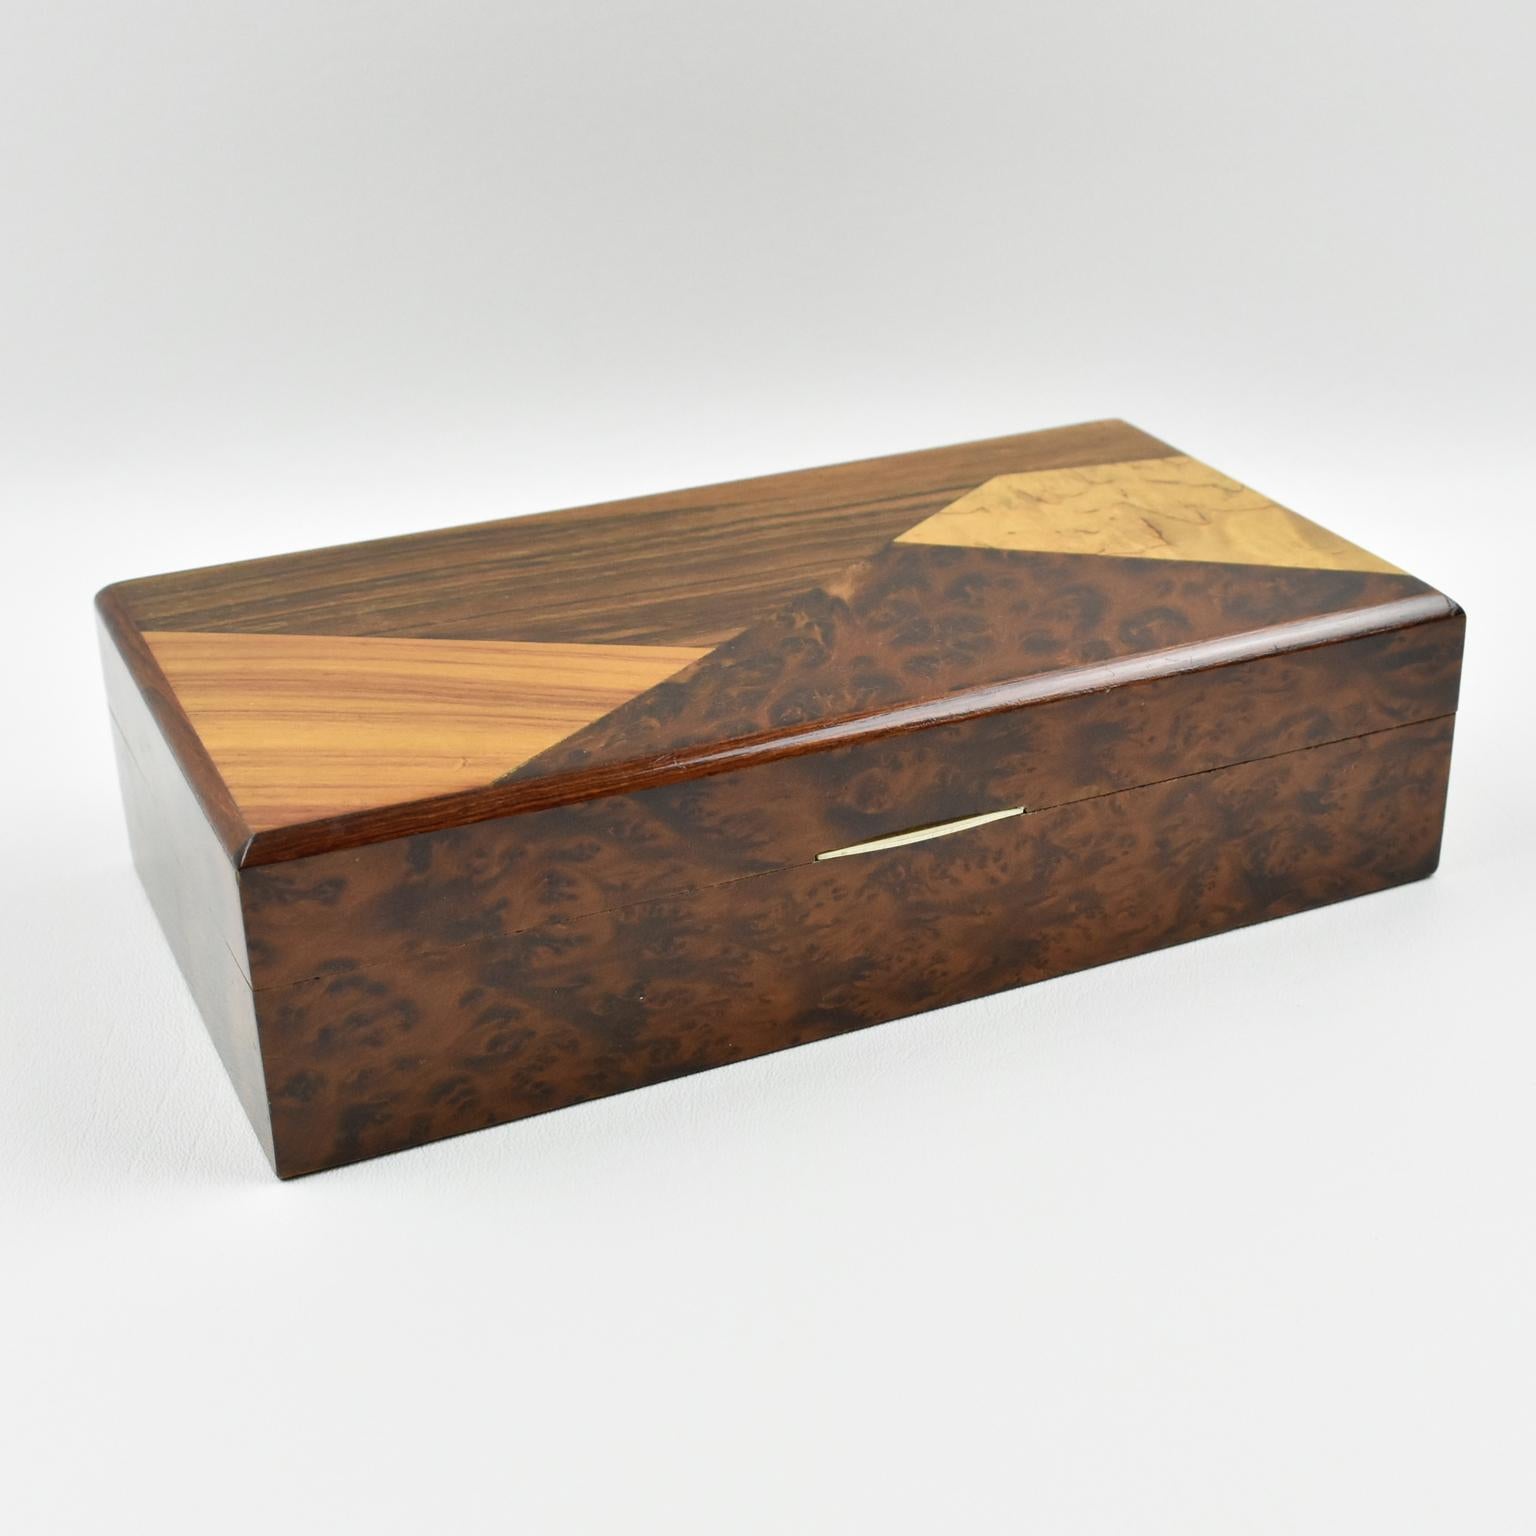 Mid-20th Century French Art Deco Long Modernist Burl Wood Box with Wooden Marquetry